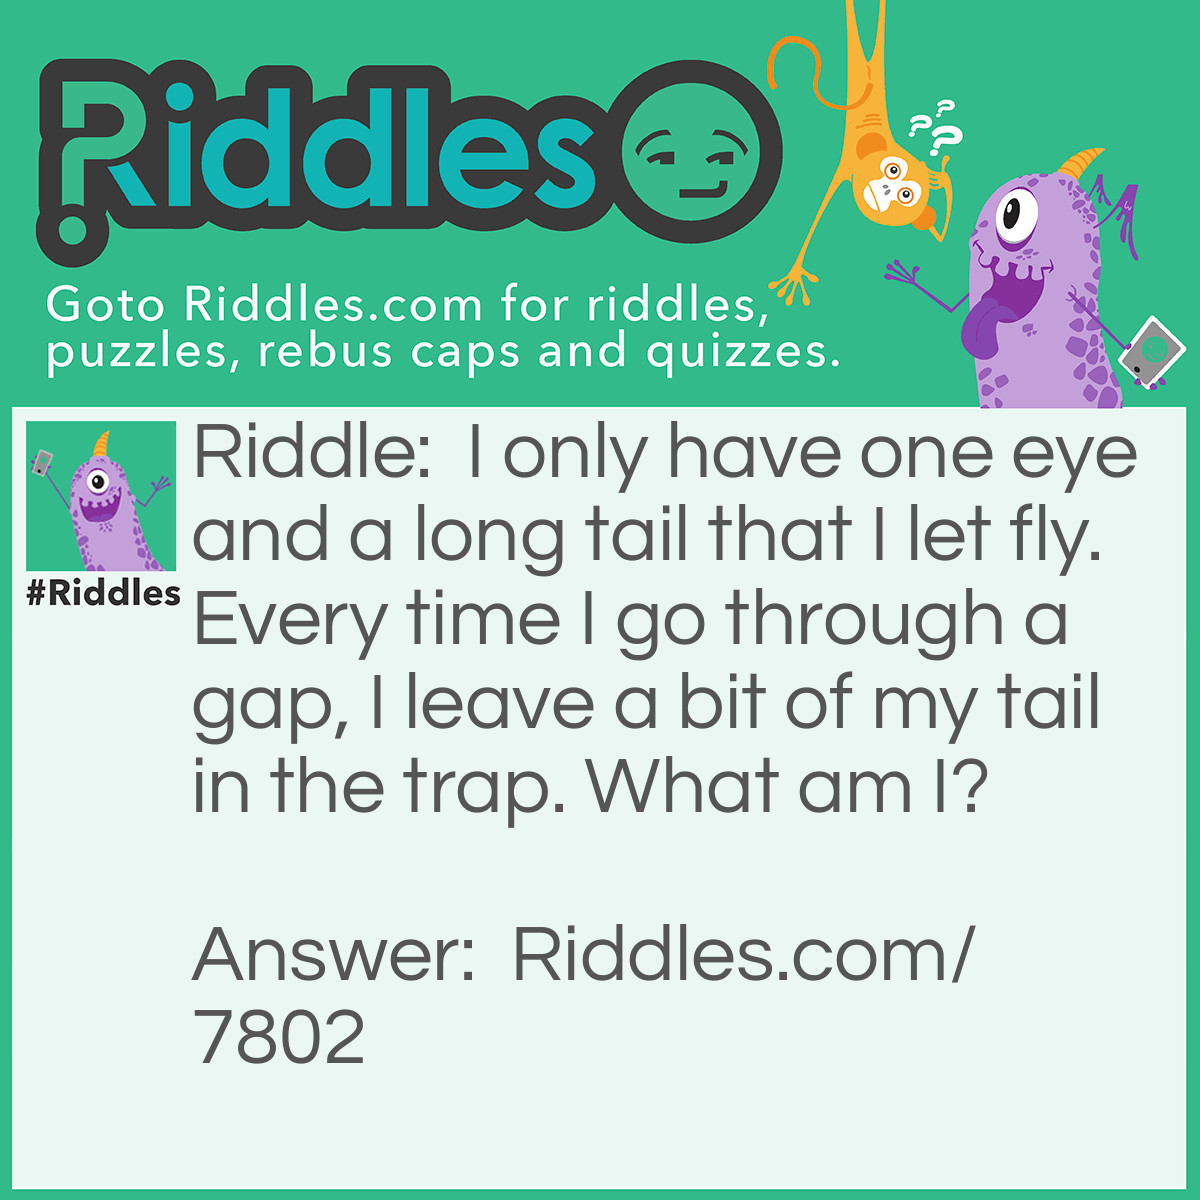 Riddle: I only have one eye and a long tail that I let fly. Every time I go through a gap, I leave a bit of my tail in the trap. What am I? Answer: A Needle and Thread